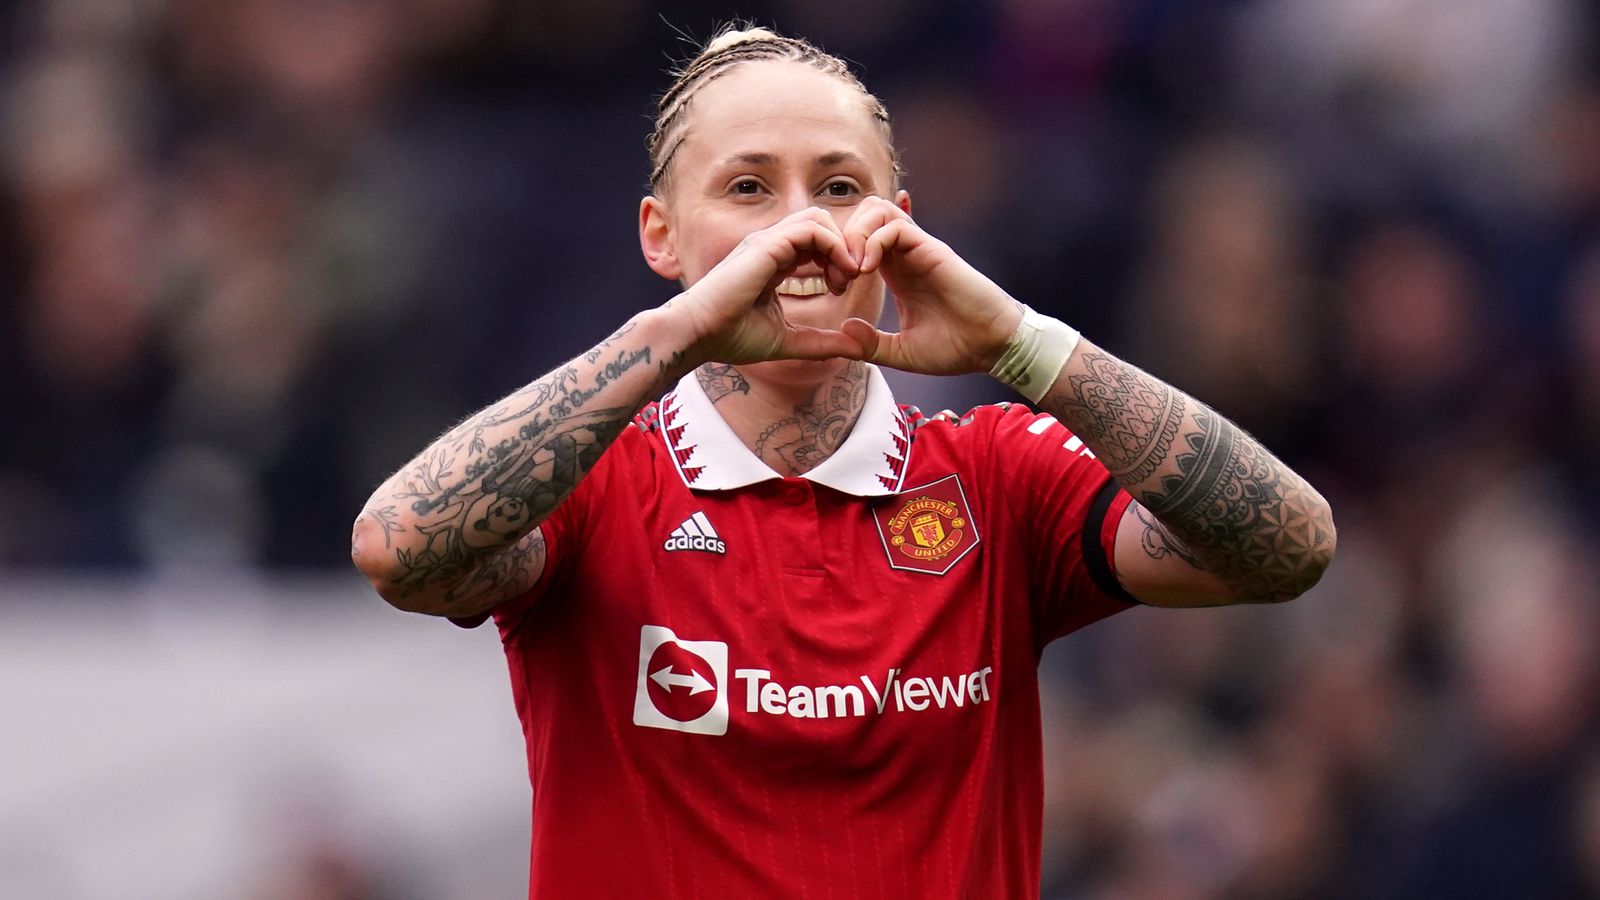 leah-galton-manchester-united-forward-admits-she-is-unlikely-to-change-stance-of-not-playing-for-england-despite-wsl-form-or-football-news